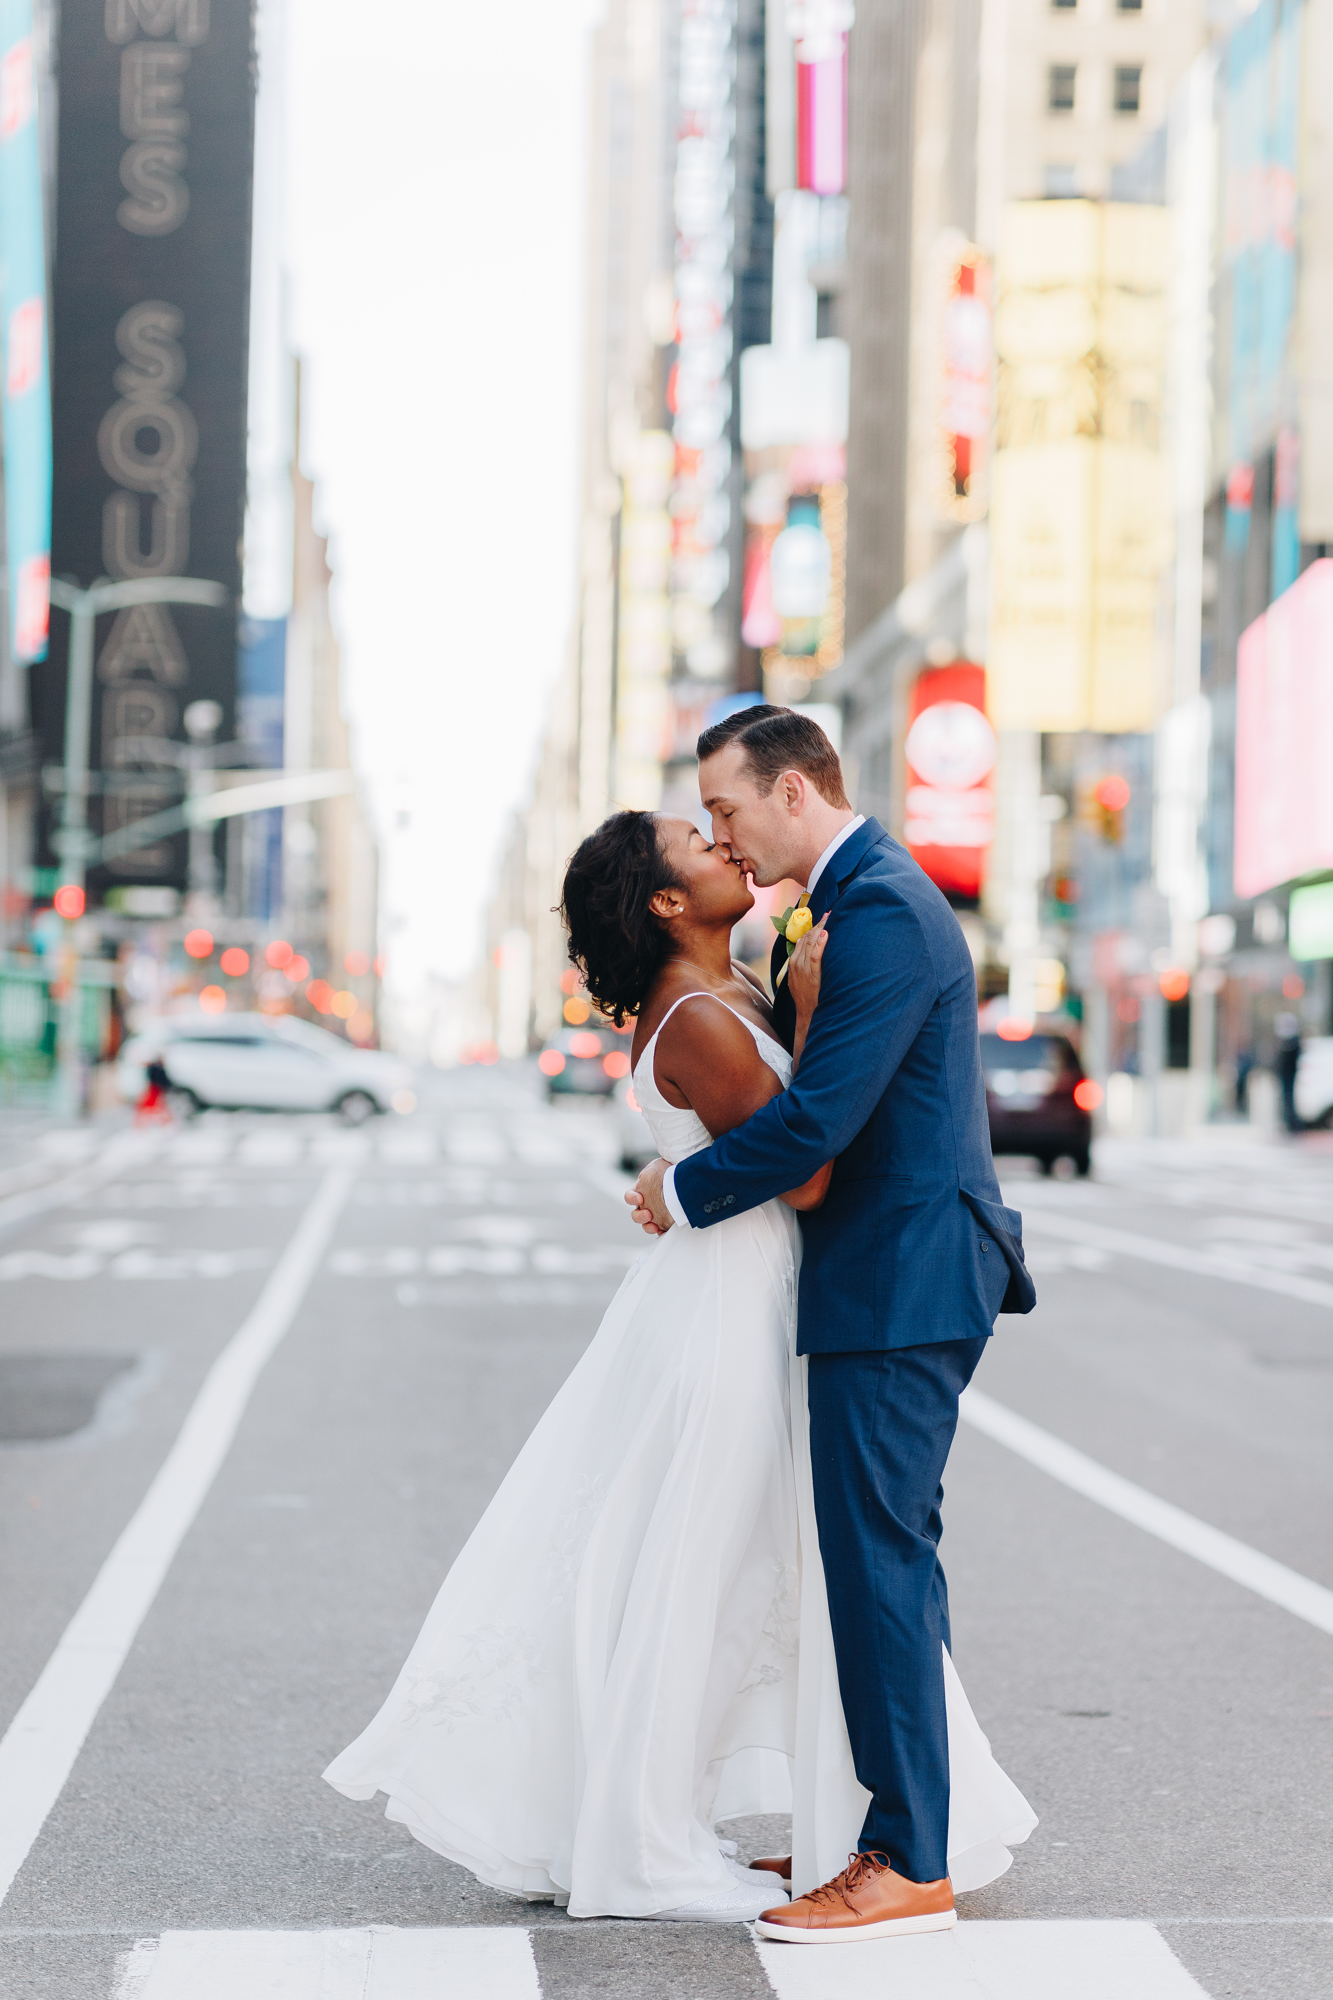 Inspirational Times Square Wedding Photos in New York